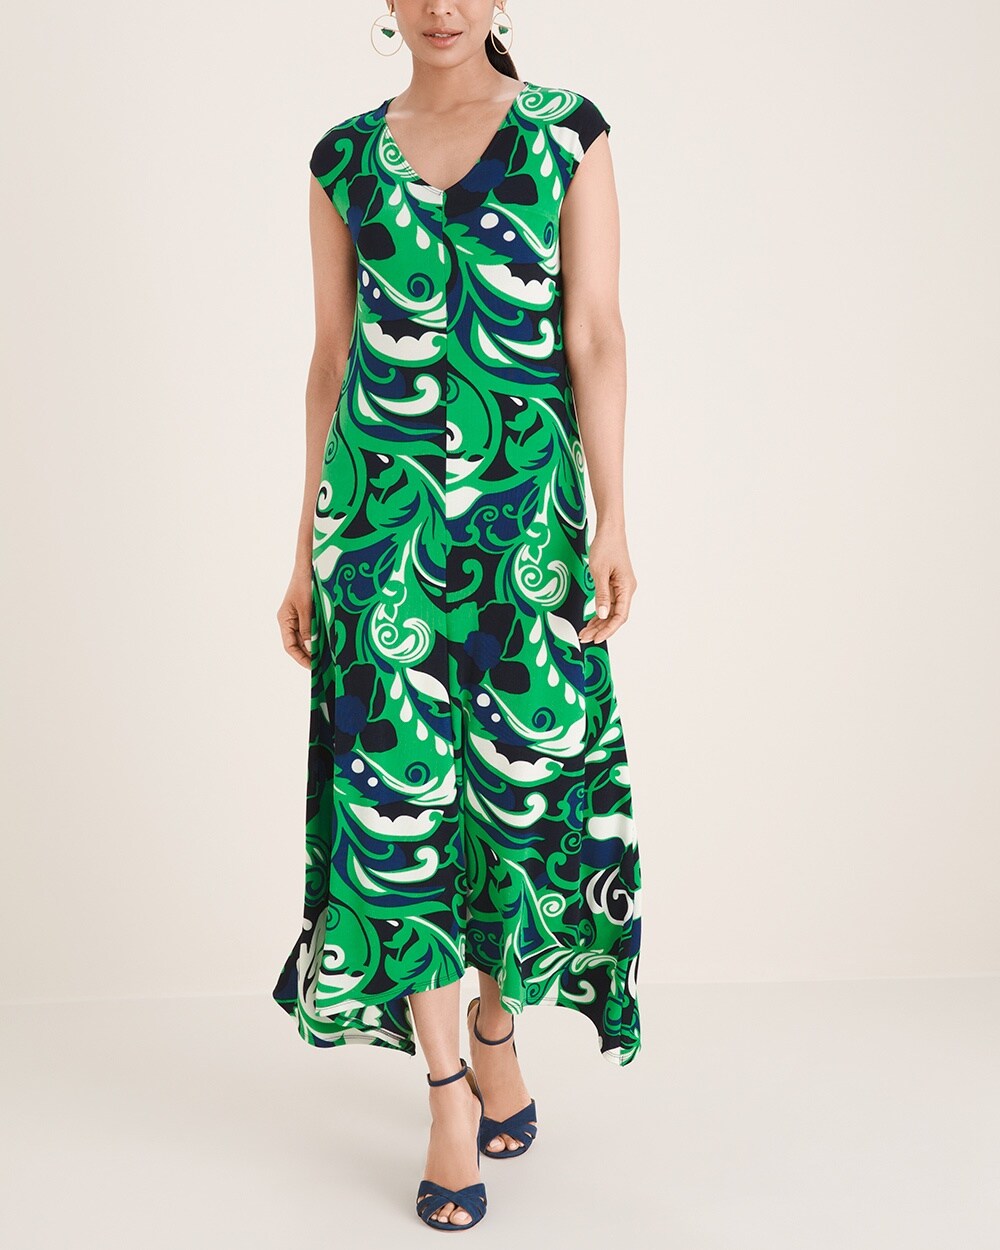 Travelers Classic Scroll-Print Dress video preview image, click to start video